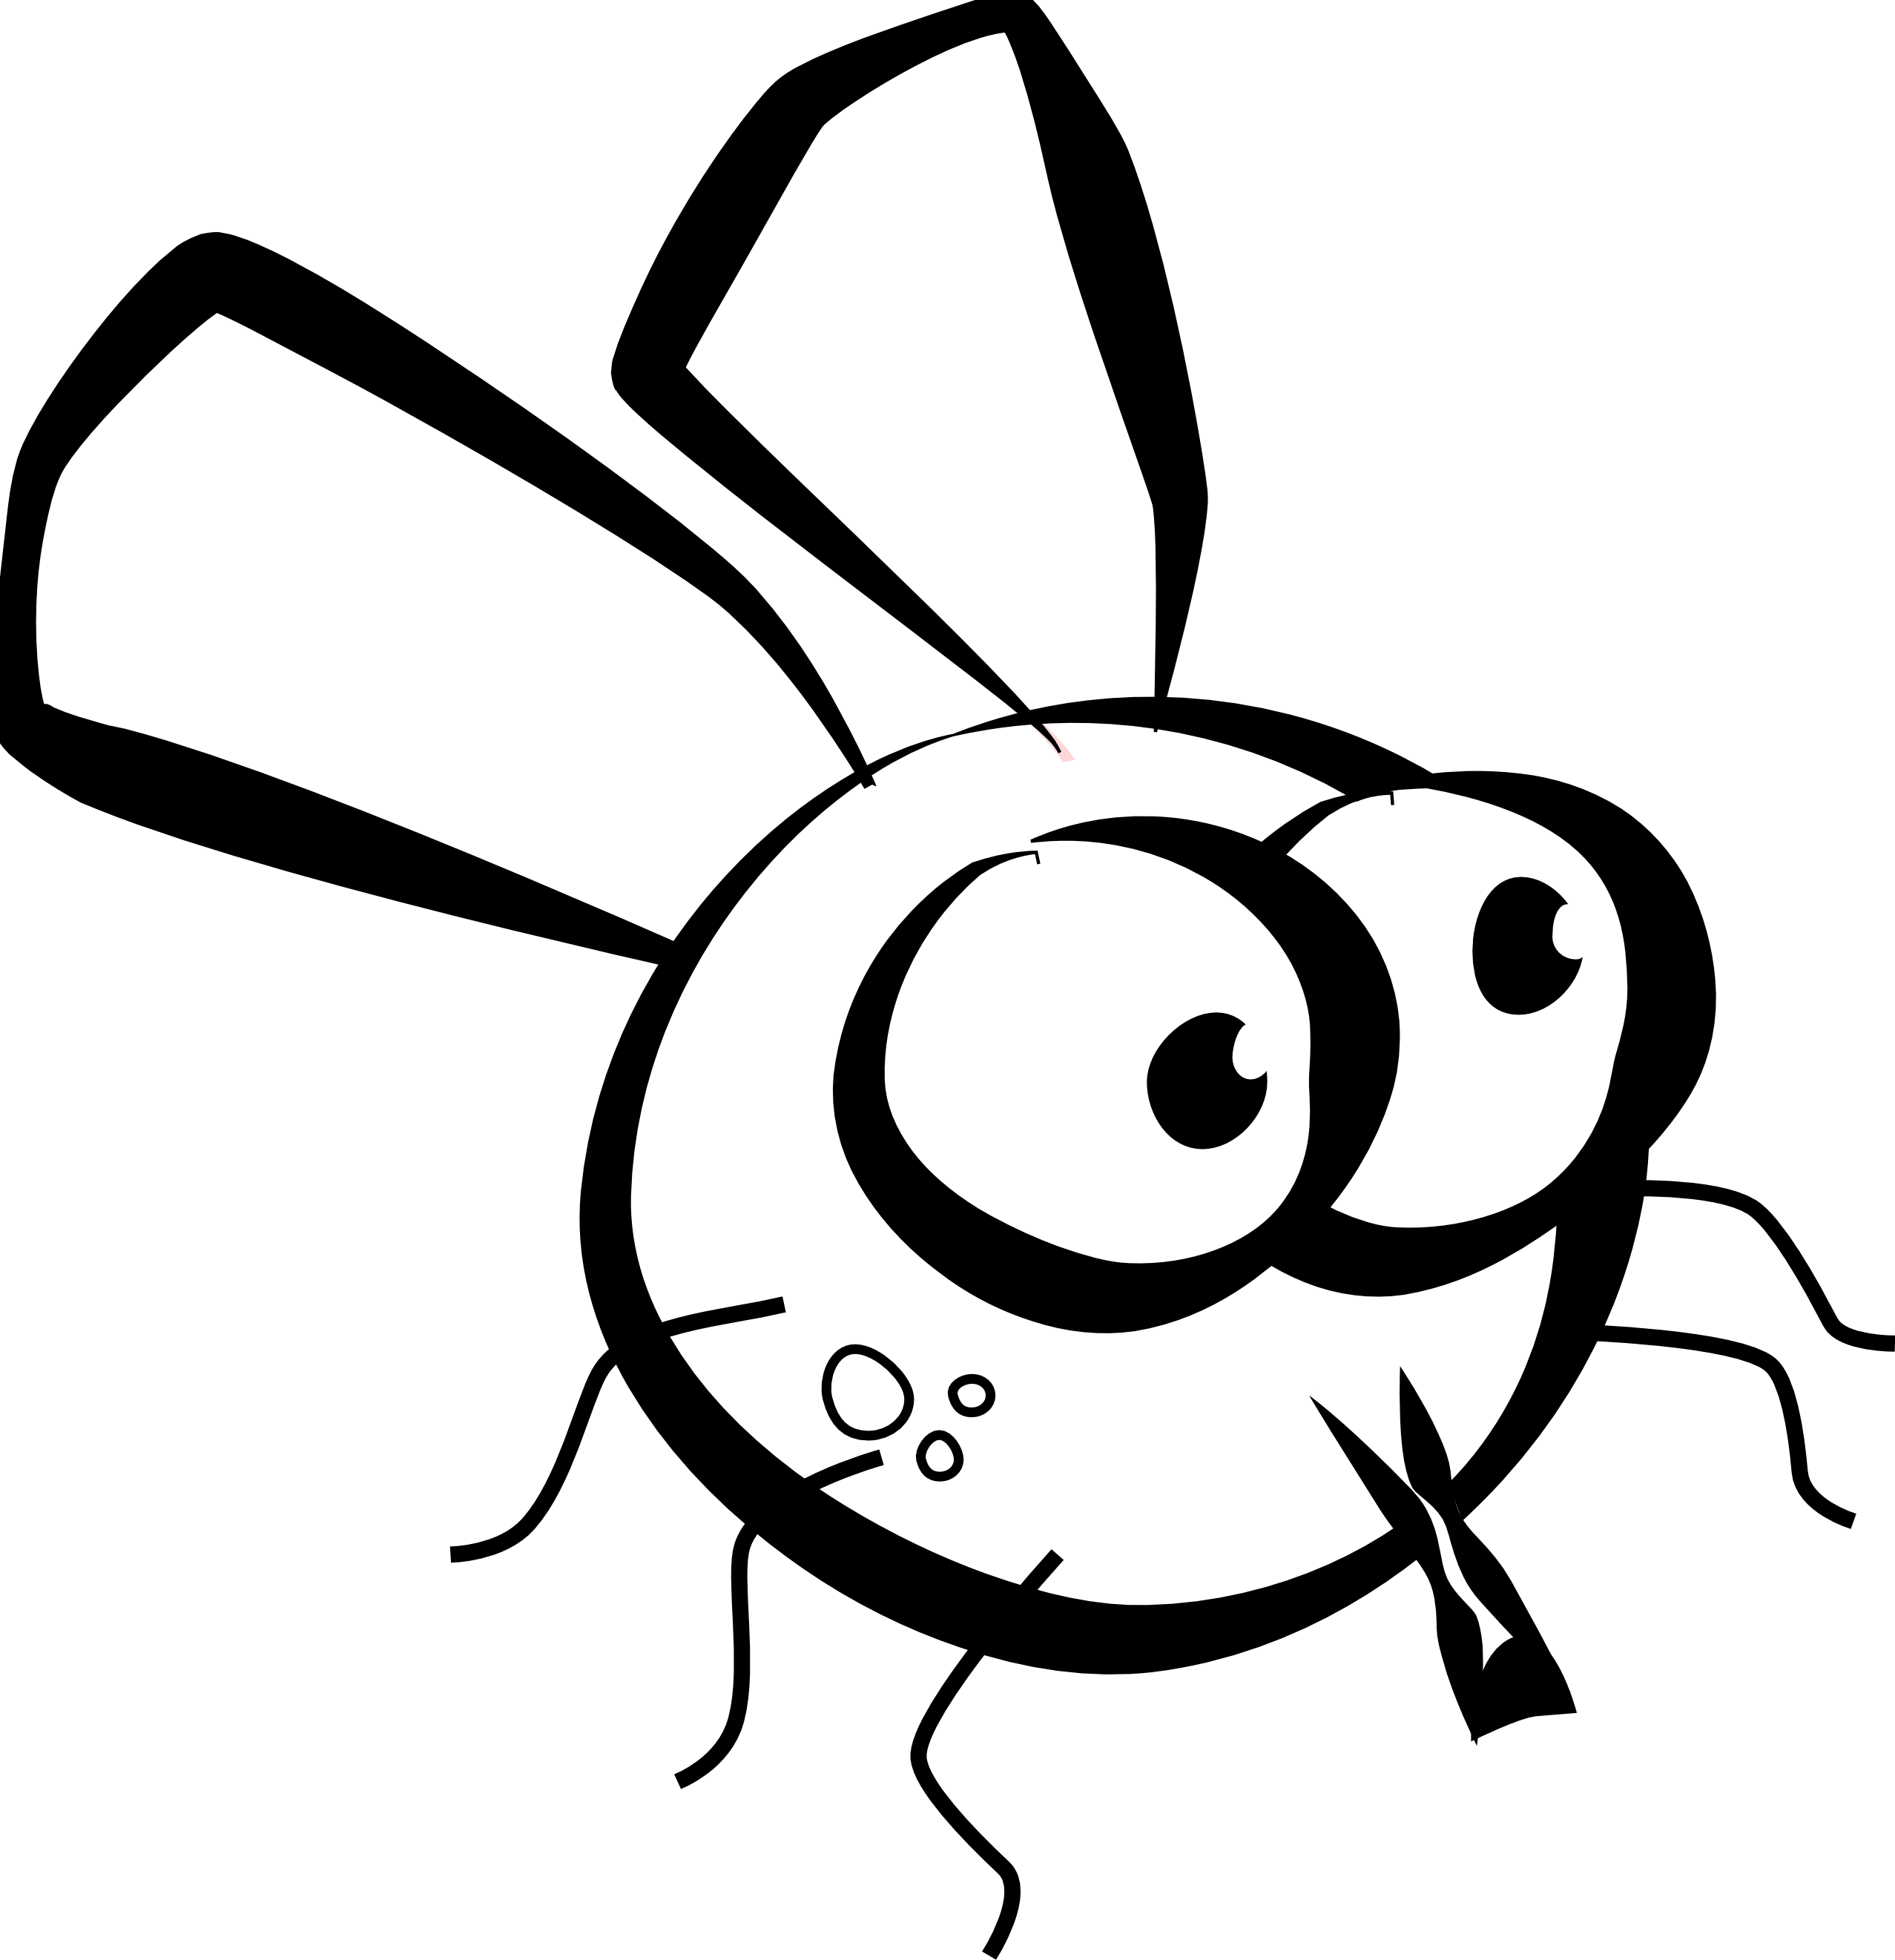 fly clipart - photo #43